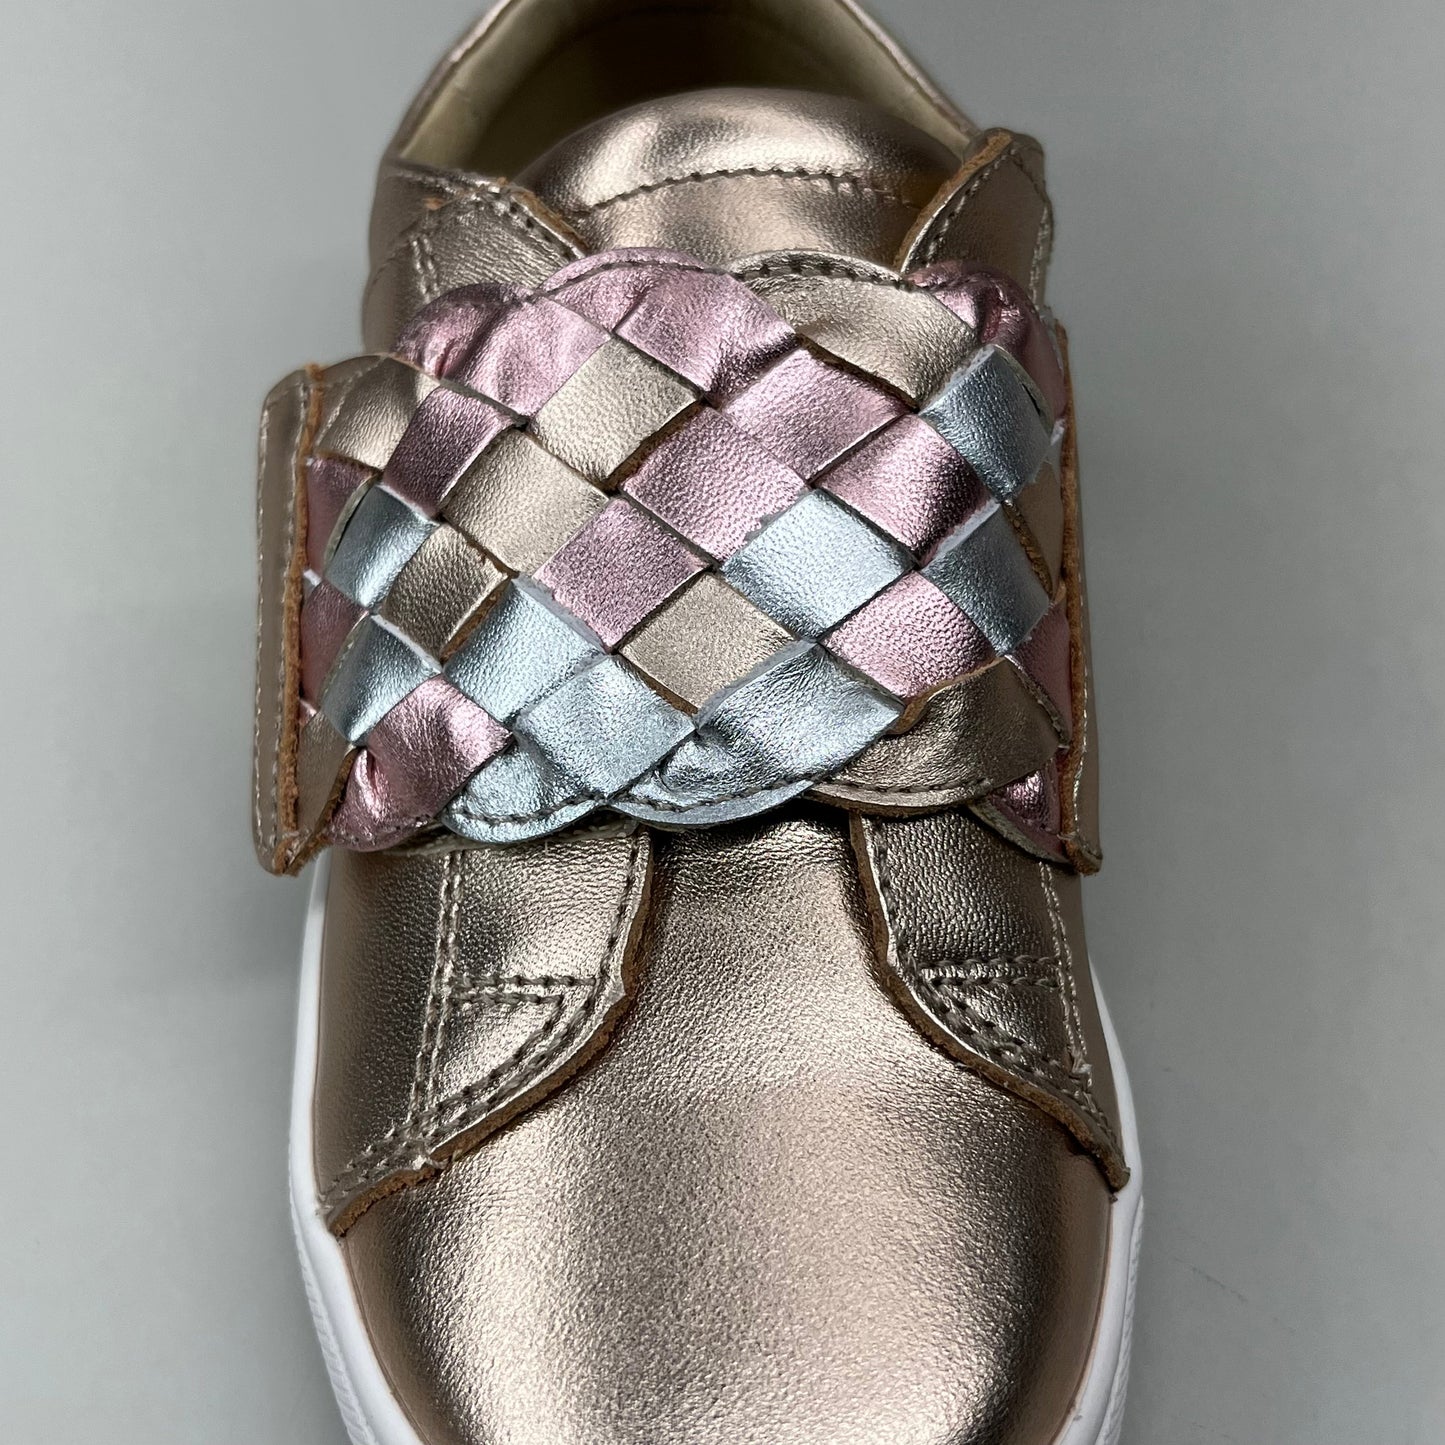 OLD SOLES Igster Sneakers Kid's Leather Shoe Sz 26 US 9.5 Copper/Silver/Pink Frost #6132